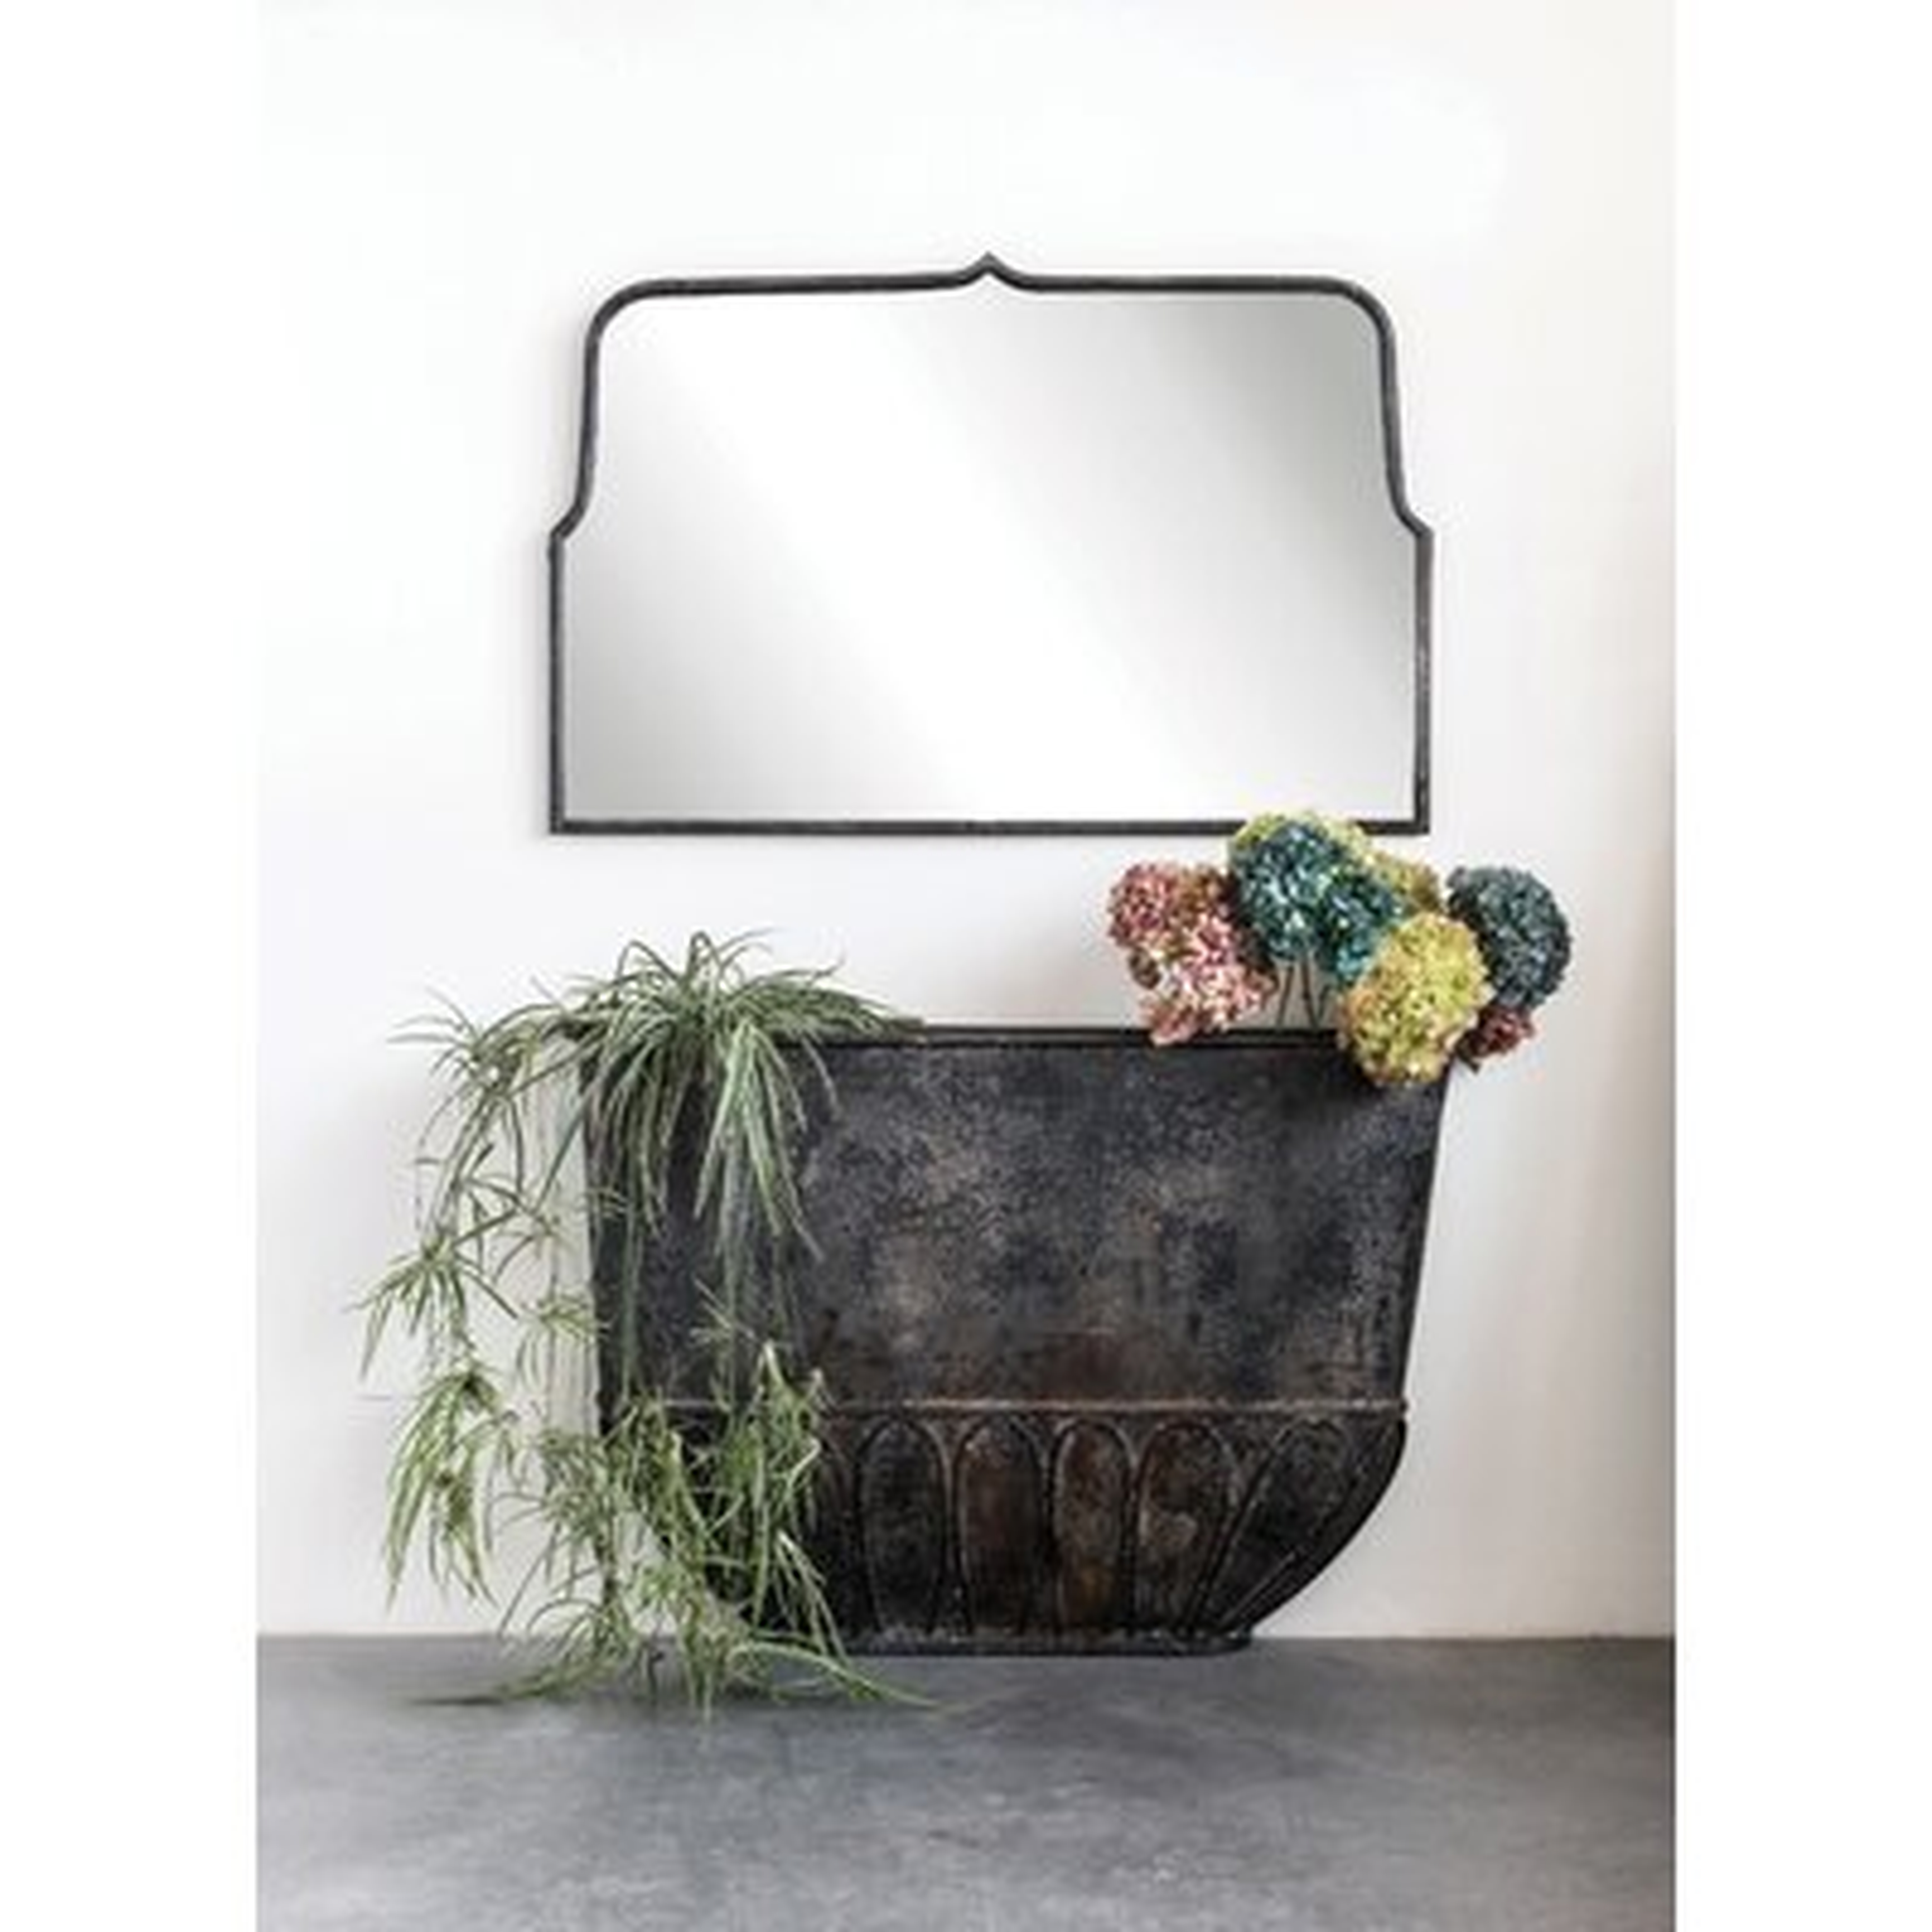 Mcnelly Decorative Wall Mirror With Distressed Black Metal Frame - Wayfair